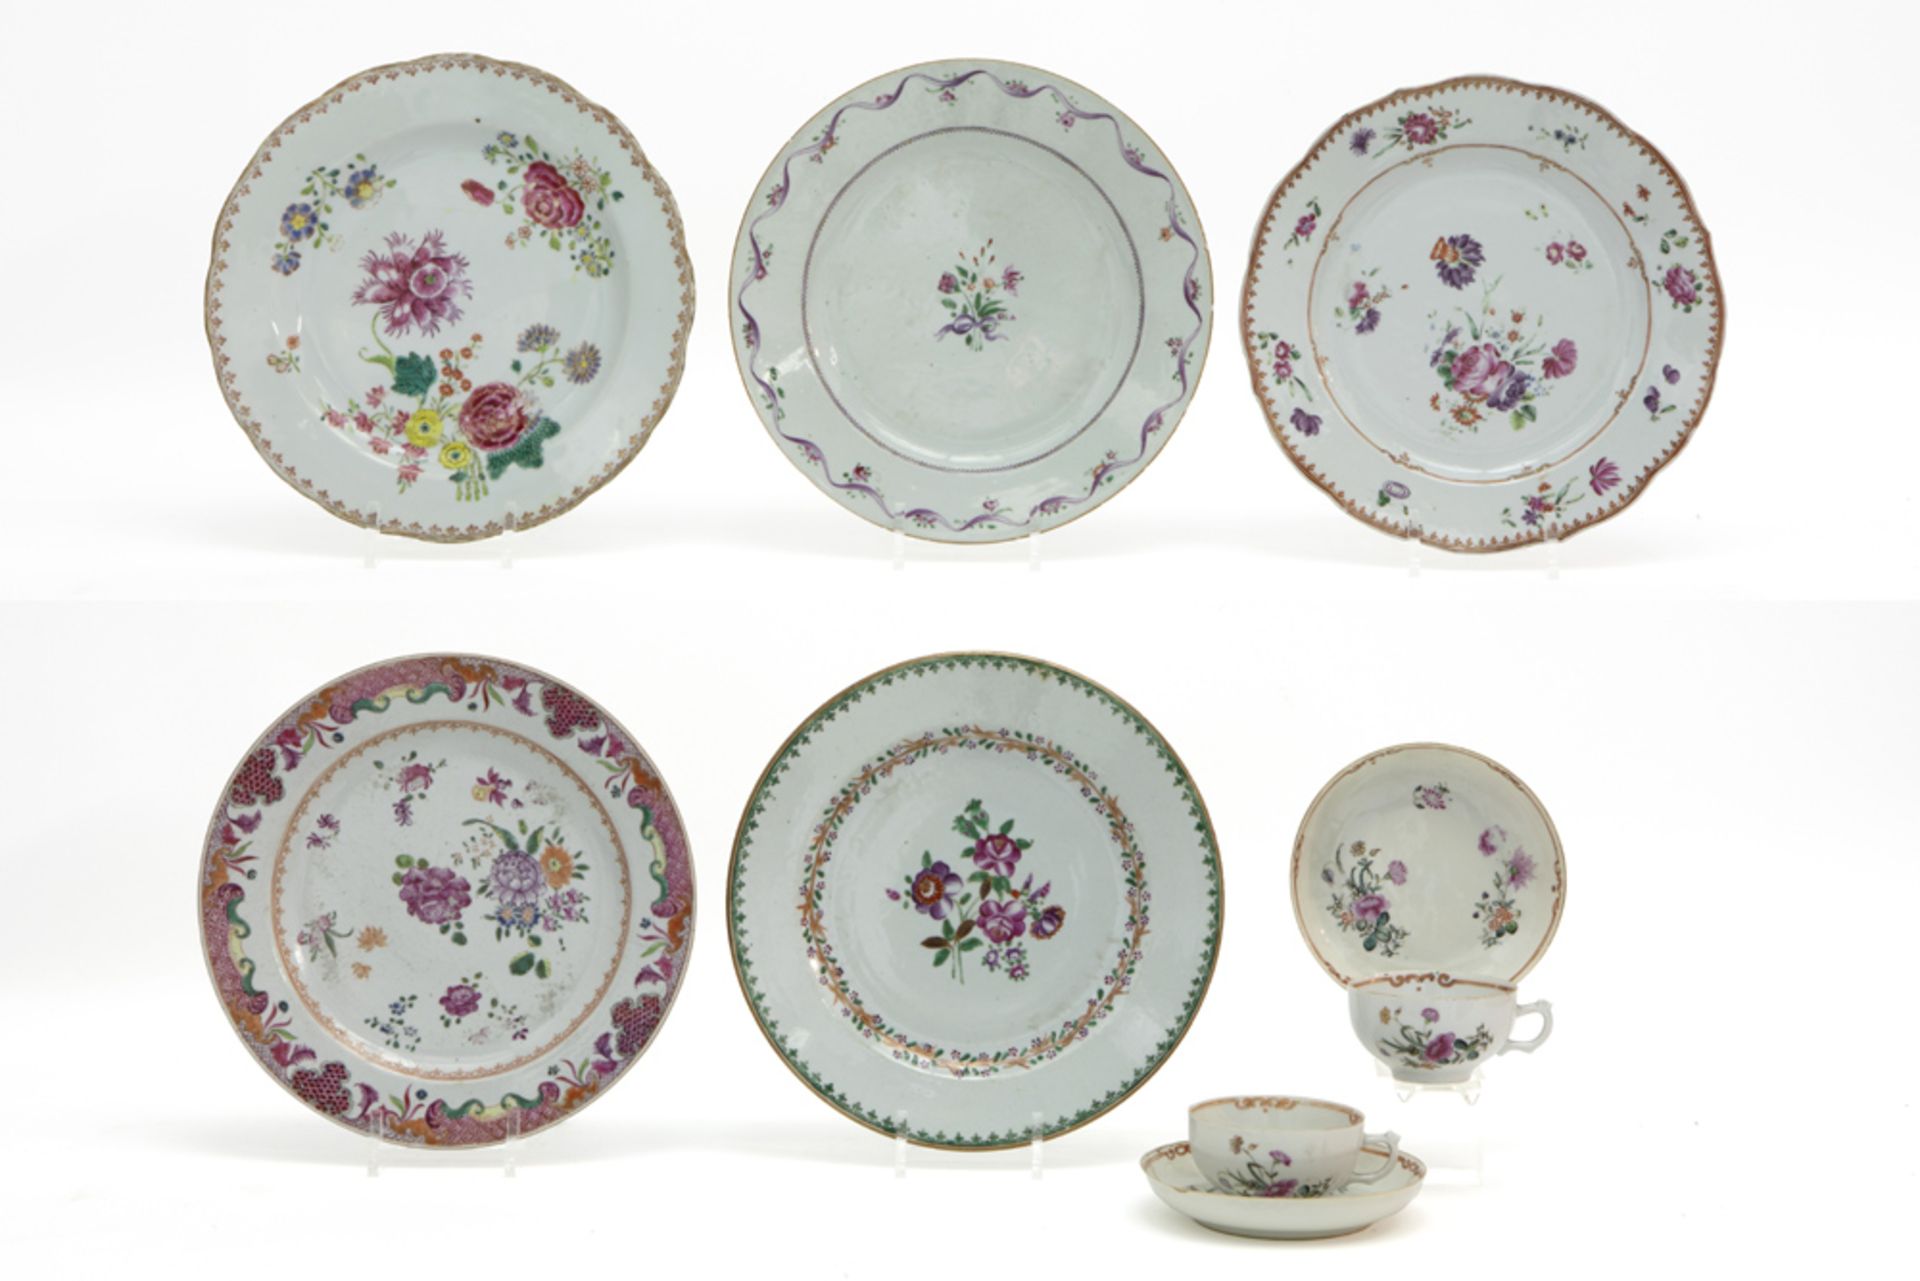 nine 18th Cent. Chinese porcelain items with a polychrome (mostly 'Famille Rose') decor : five